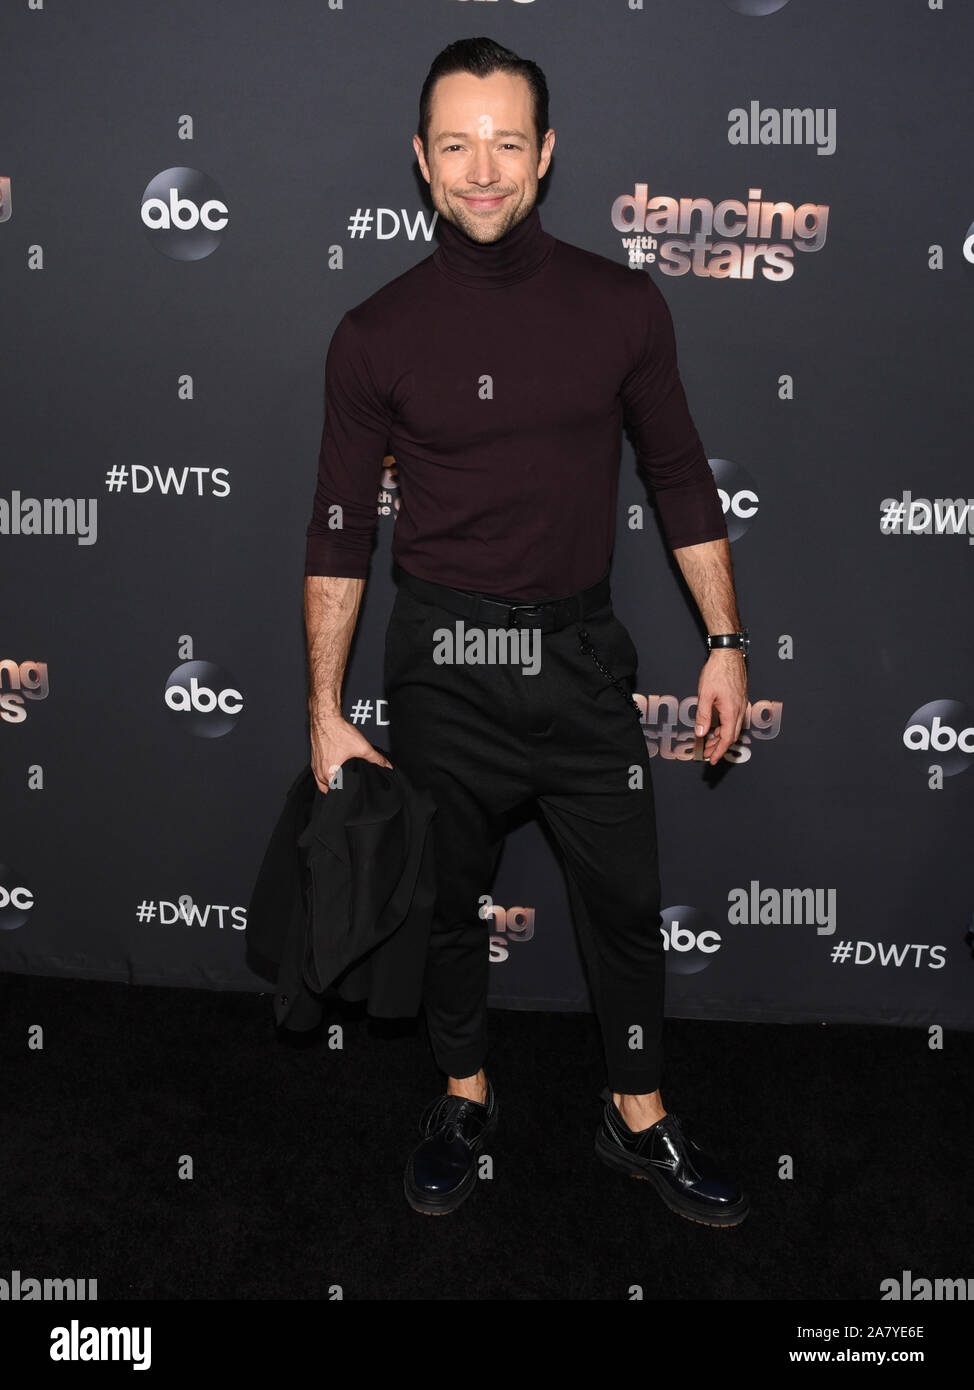 November 4, 2019, Los Angeles, California, USa: Pasha Pashkov attends Dancing With The Stars - 2019 top 6 finalist event. (Credit Image: © Billy Bennight/ZUMA Wire) Stock Photo